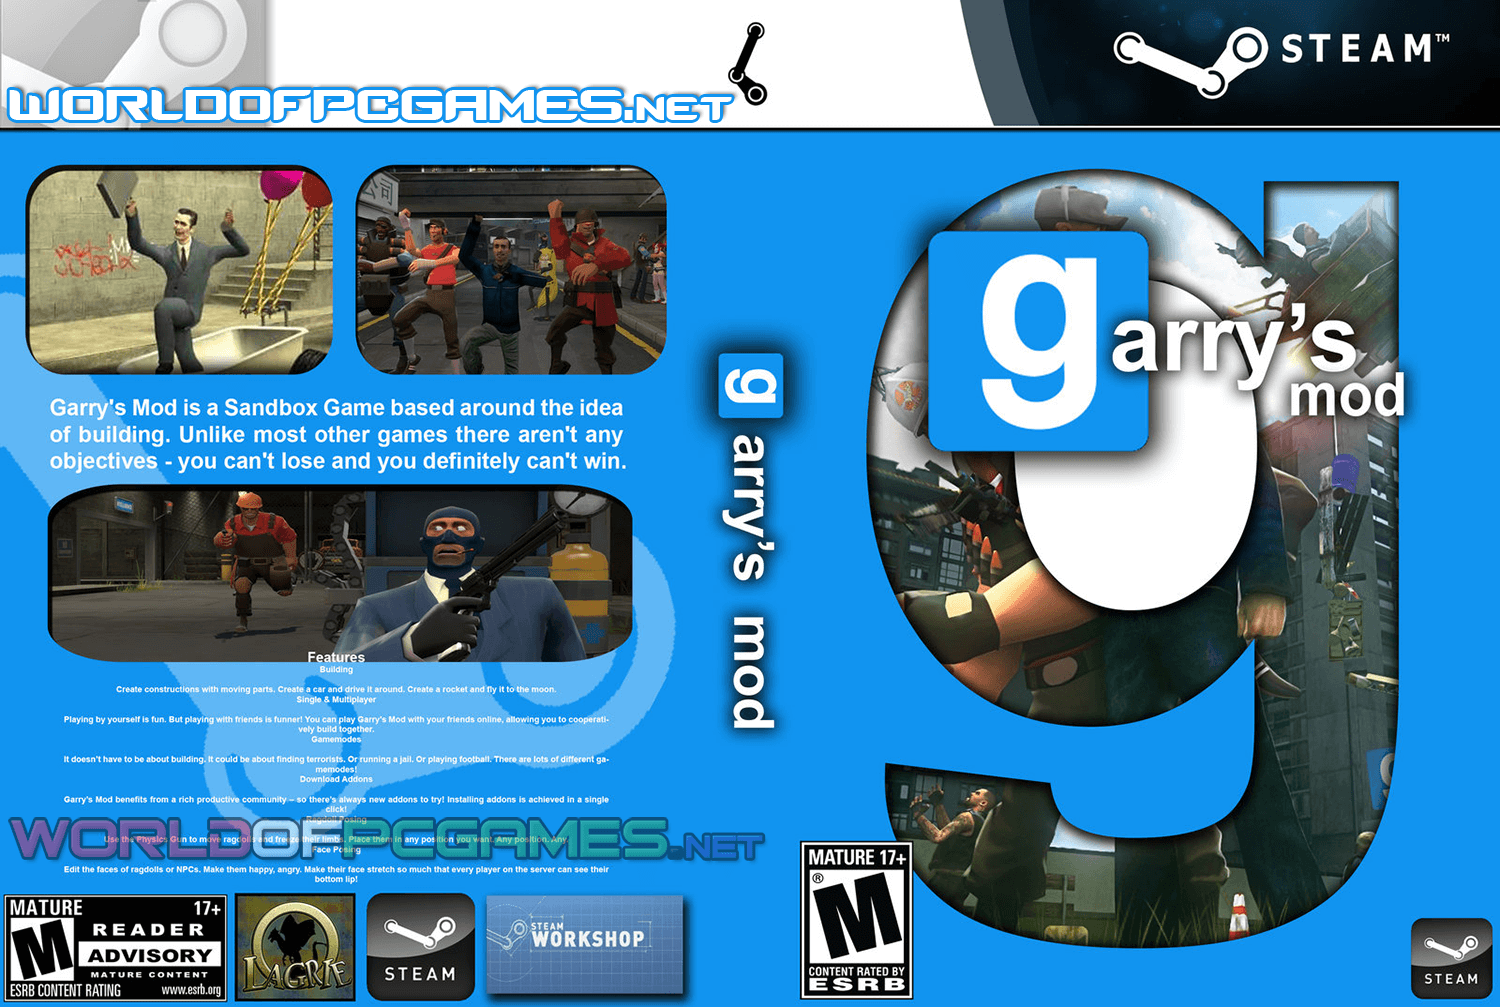 why is steam updating garrys mod and not telling me when it